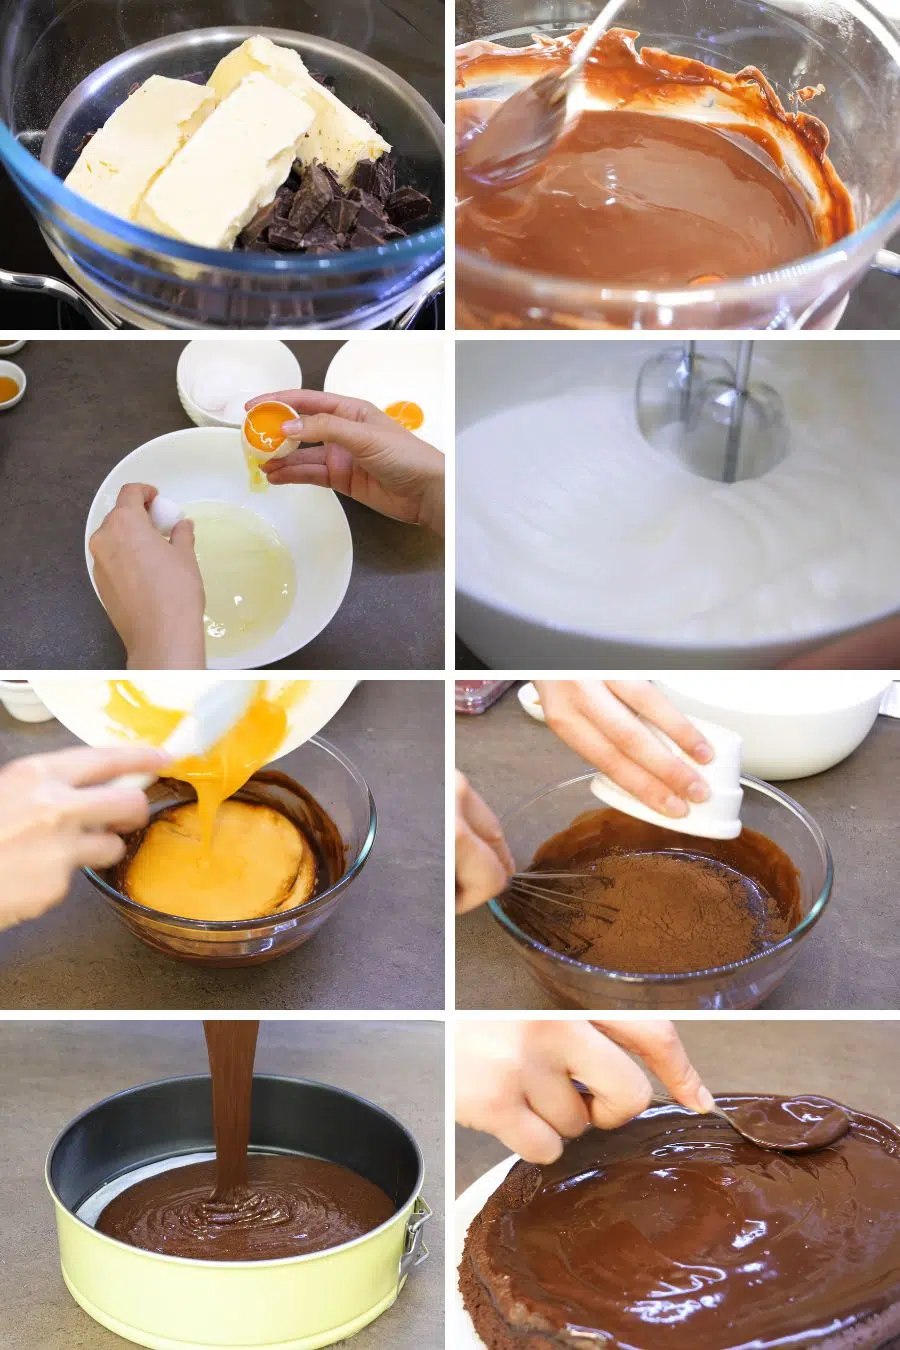 how to make flourless chocolate cake step by step instructions